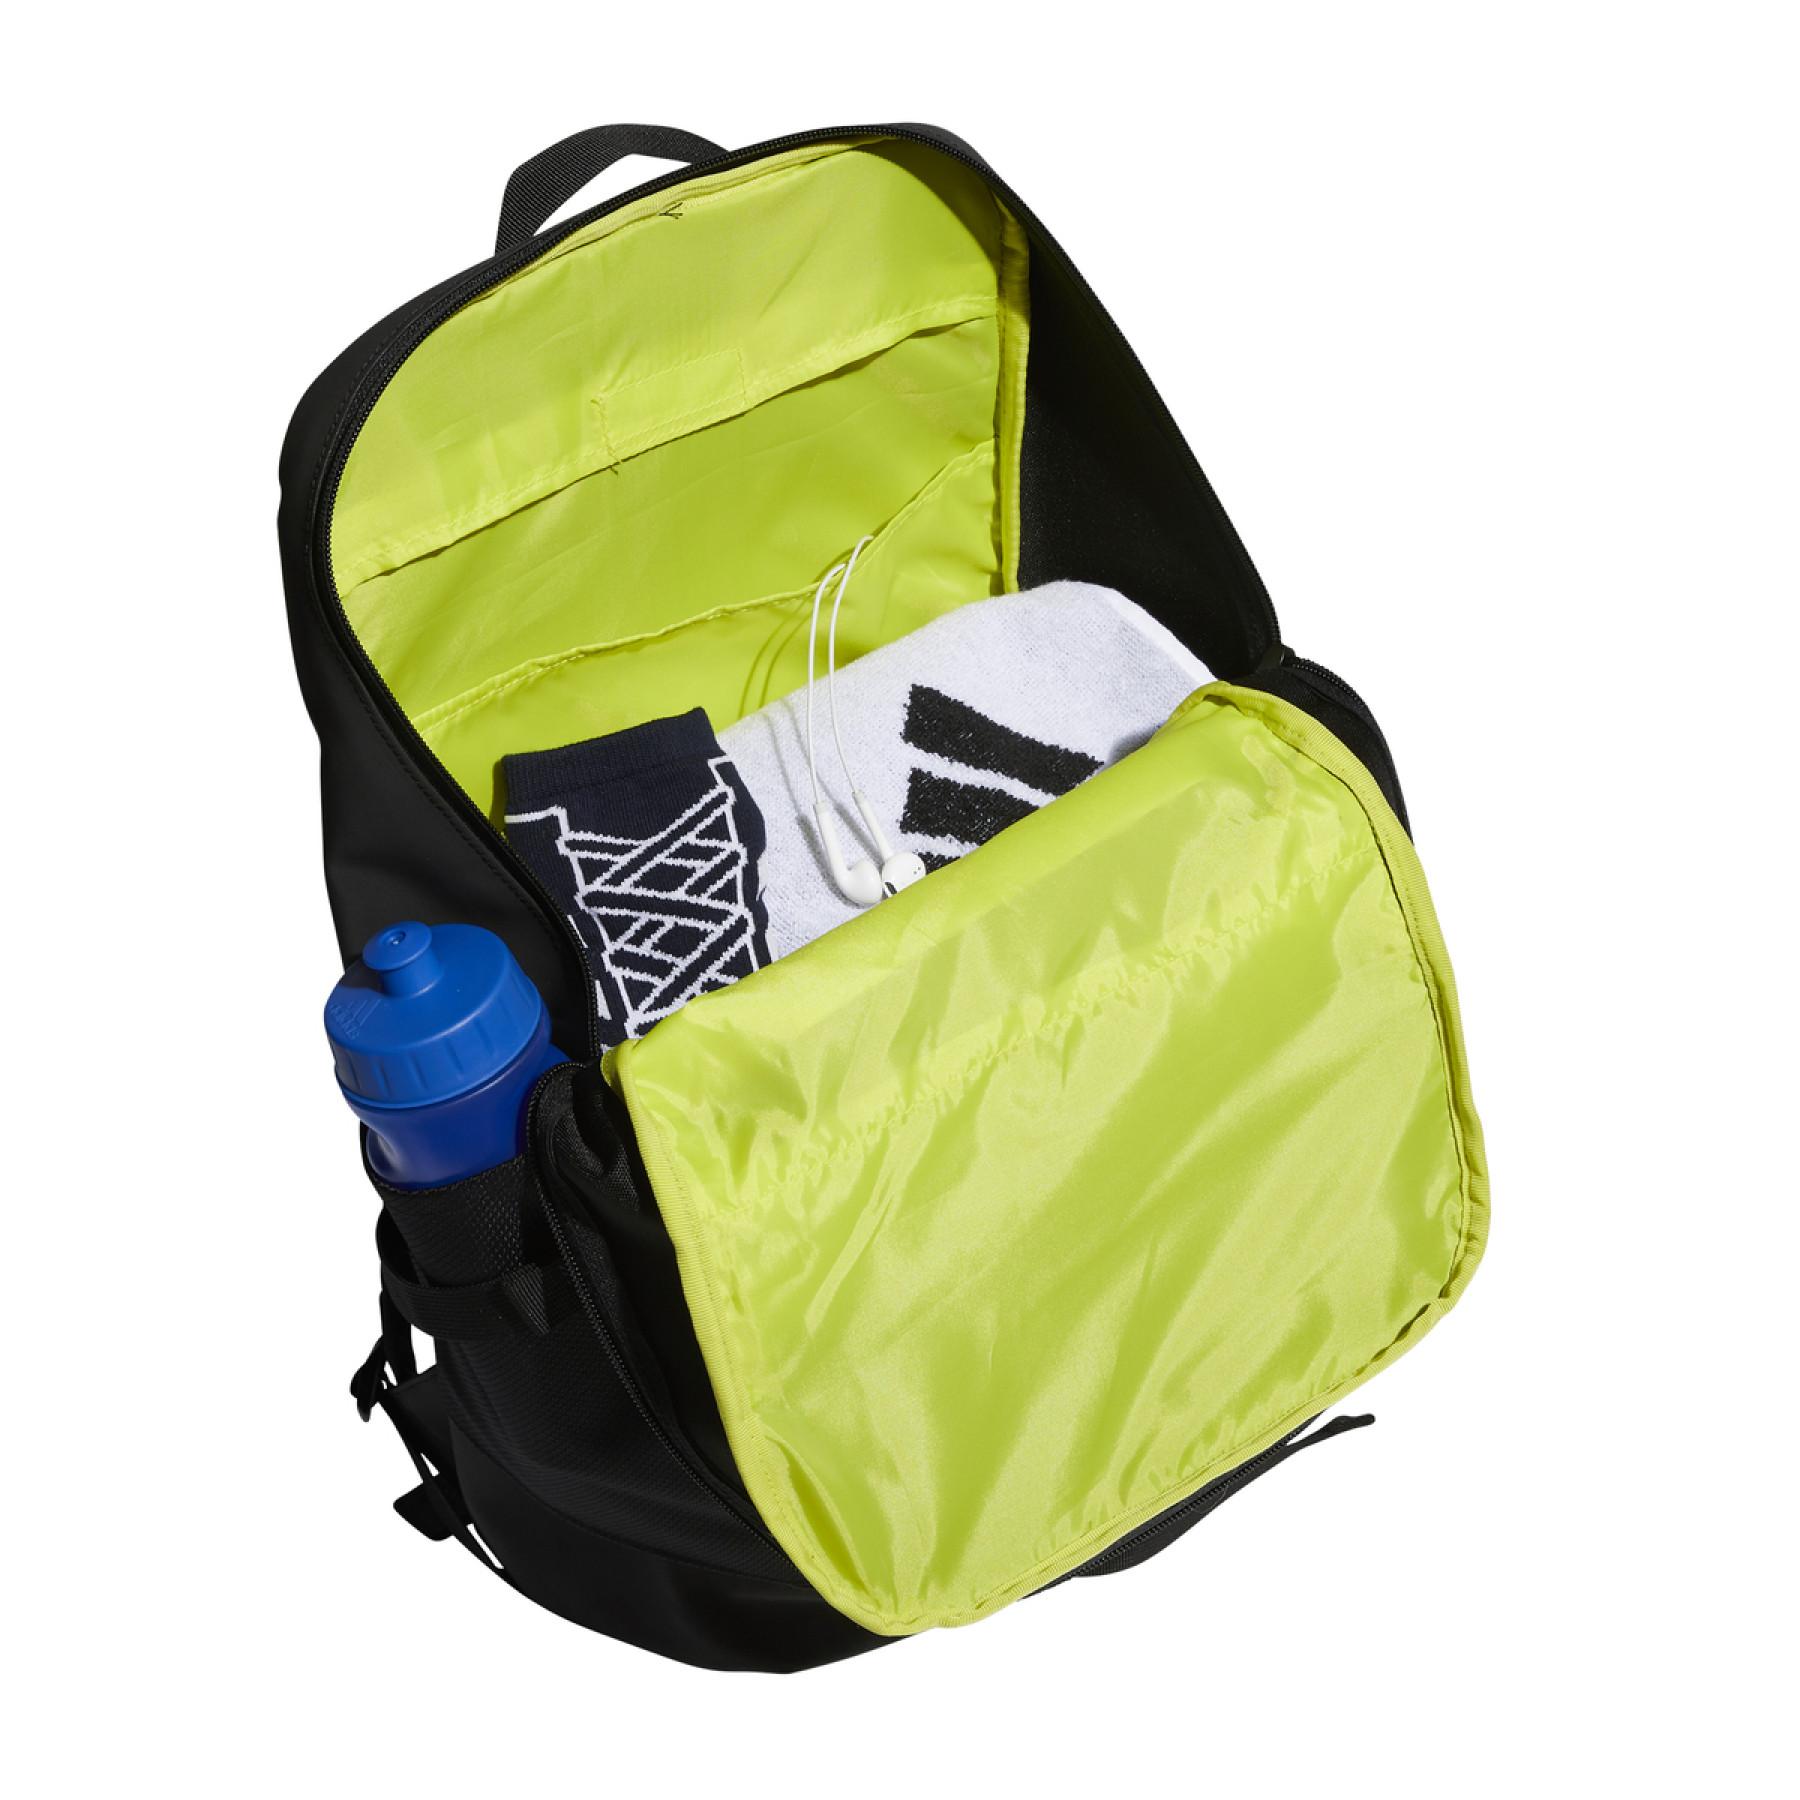 Backpack adidas Endurance Packing System 30